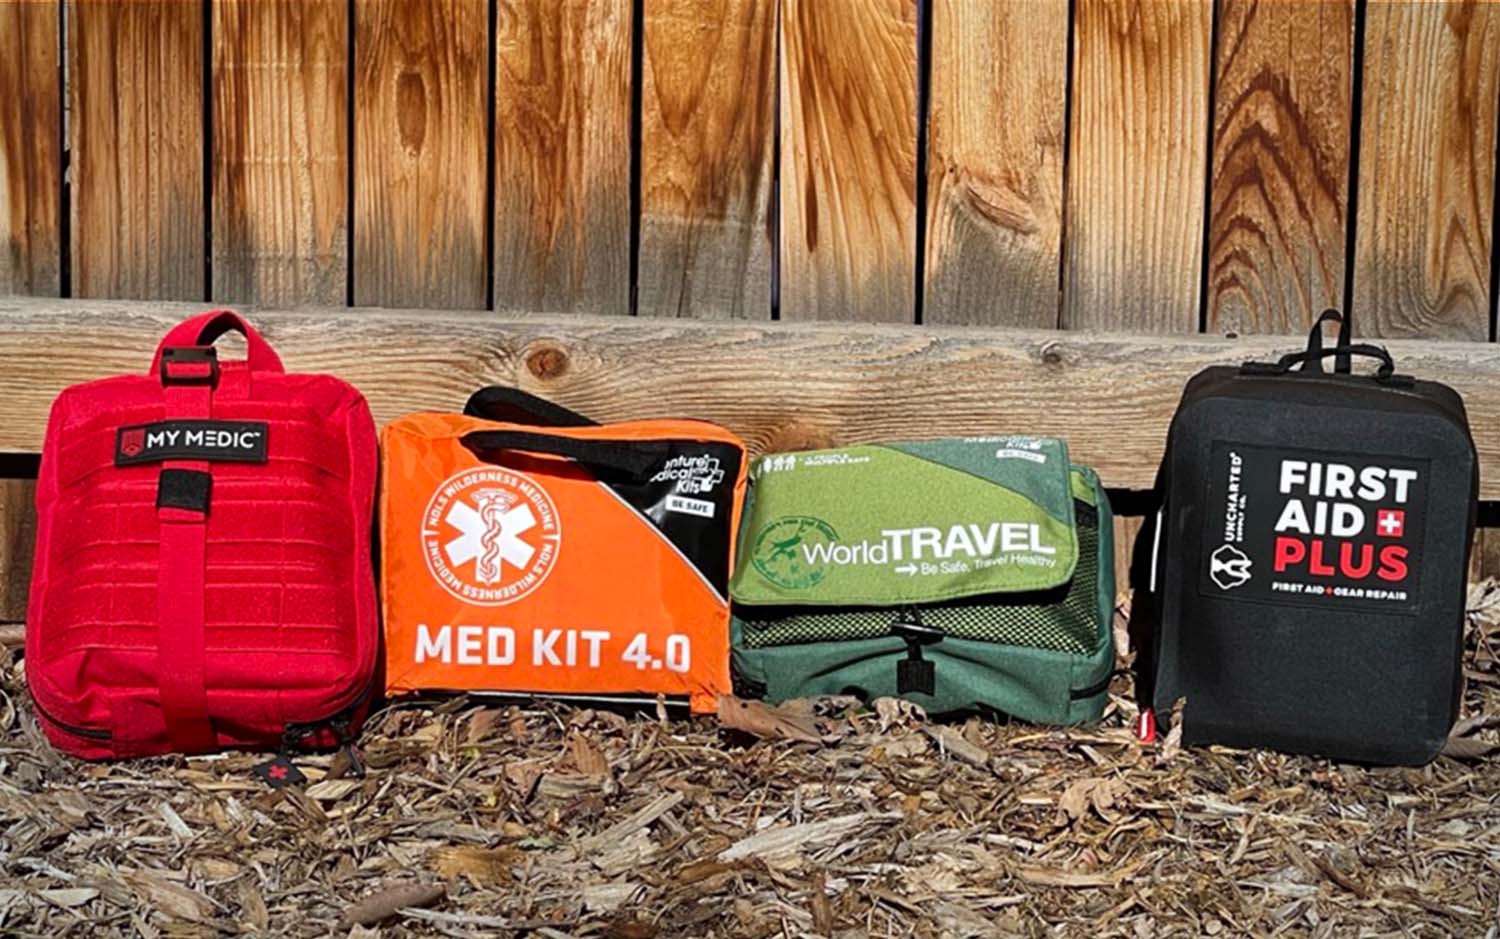 Even if you never have to use it, you need a first aid kit whenever you head outside.